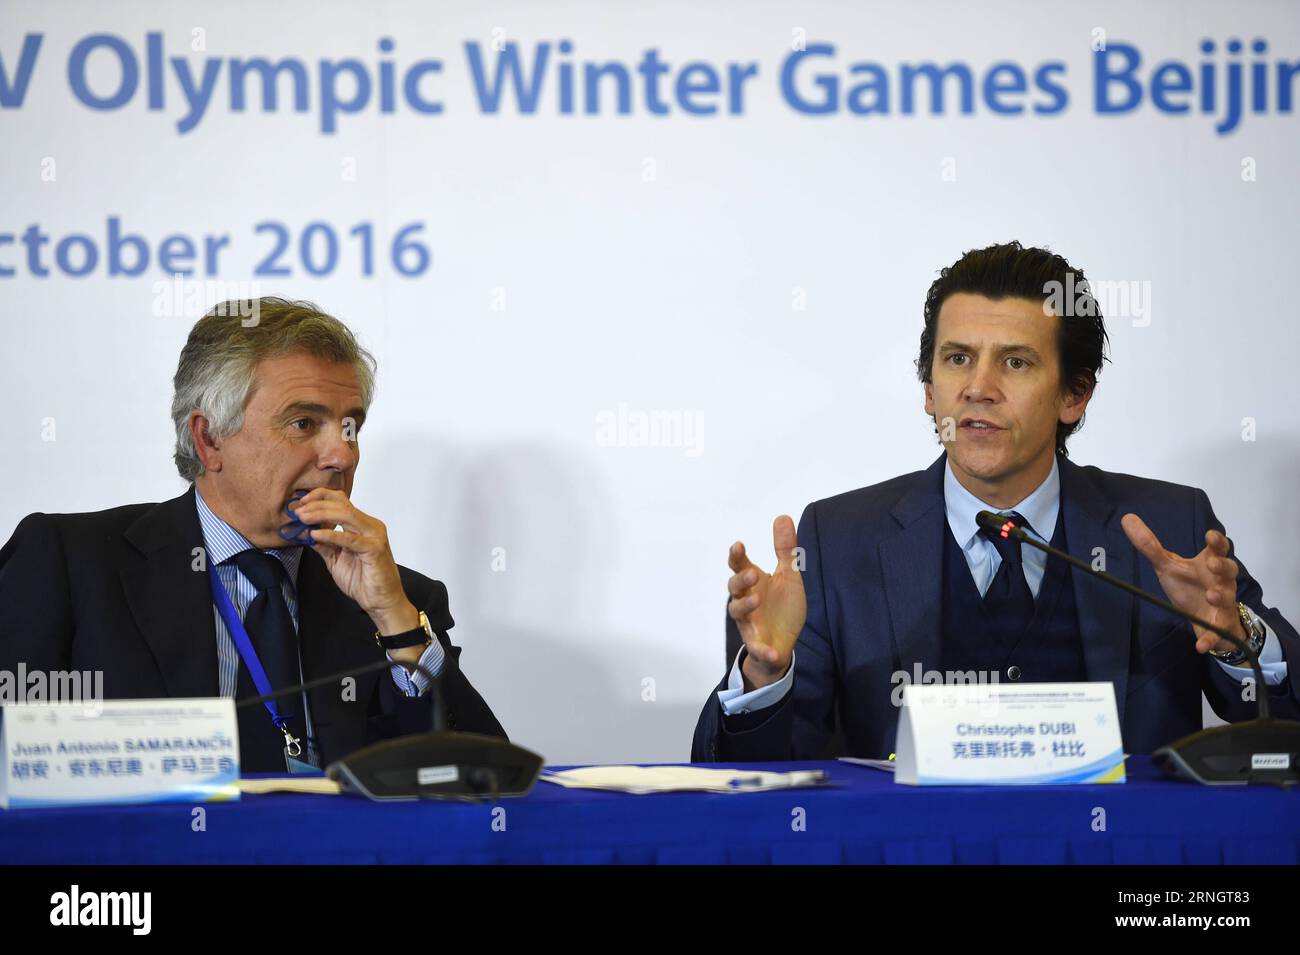 -- BEIJING, Oct. 12. 2016 -- Christophe Dubi (R), the IOC s executive director of the Olympic Games speaks during the press conference for the 1st Meeting of the IOC Coordination Commission for the XXIV Olympic Winter Games Beijing 2022 in Beijing, capital of China, Oct. 12, 2016. ) (SP)CHINA-BEIJING-2022 OLYMPIC WINTER GAMES-IOC COORDINATION COMMISSION-PRESS CONFERENCE (CN) JuxHuanzong PUBLICATIONxNOTxINxCHN   Beijing OCT 12 2016 Christophe Dubi r The IOC S Executive Director of The Olympic Games Speaks during The Press Conference for The 1st Meeting of The IOC Coordination Commission for The Stock Photo